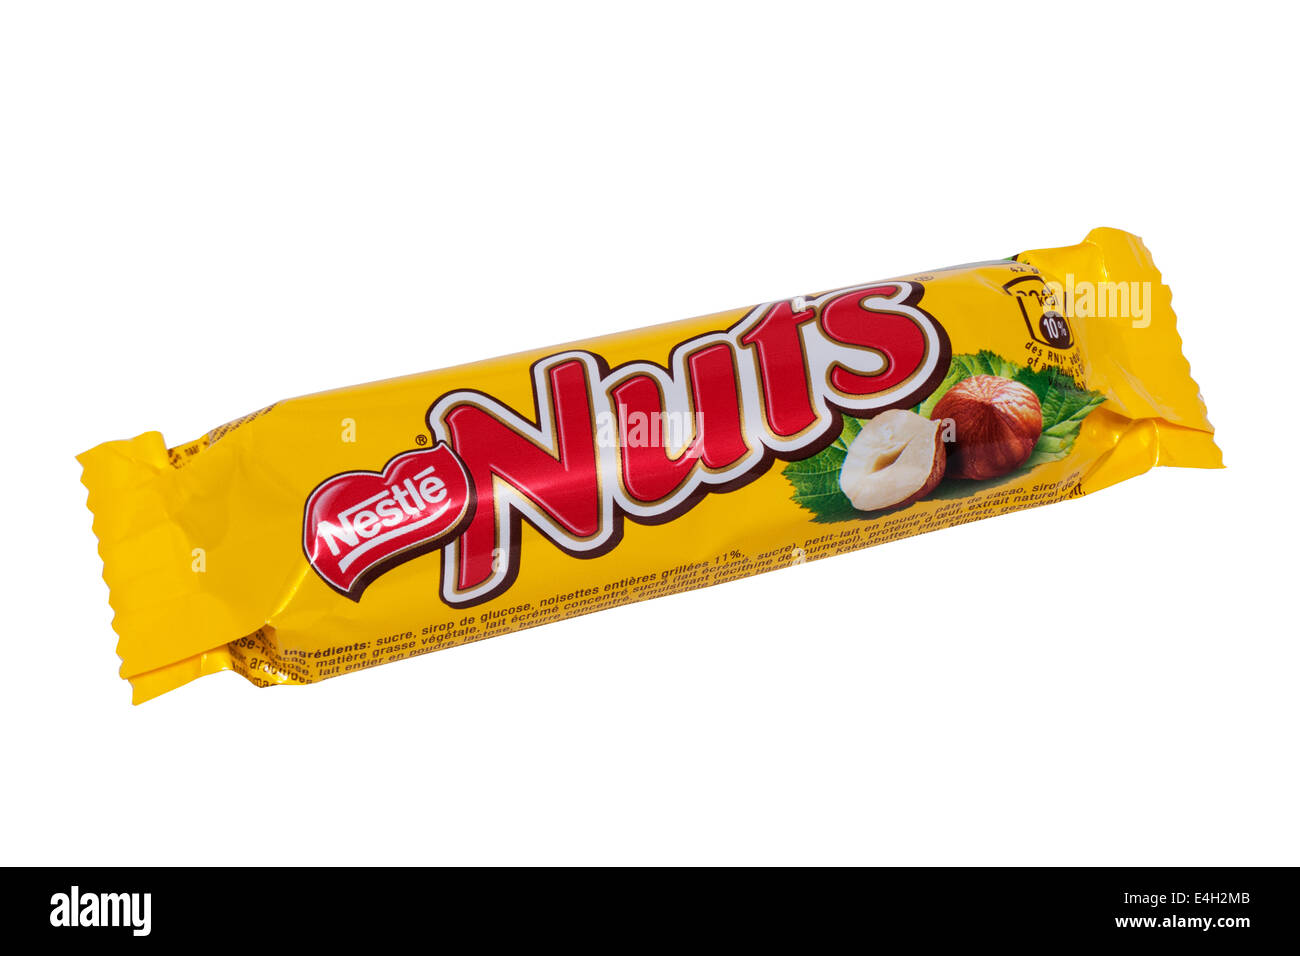 A Nestle Nuts chocolate bar on a white background Stock Photo